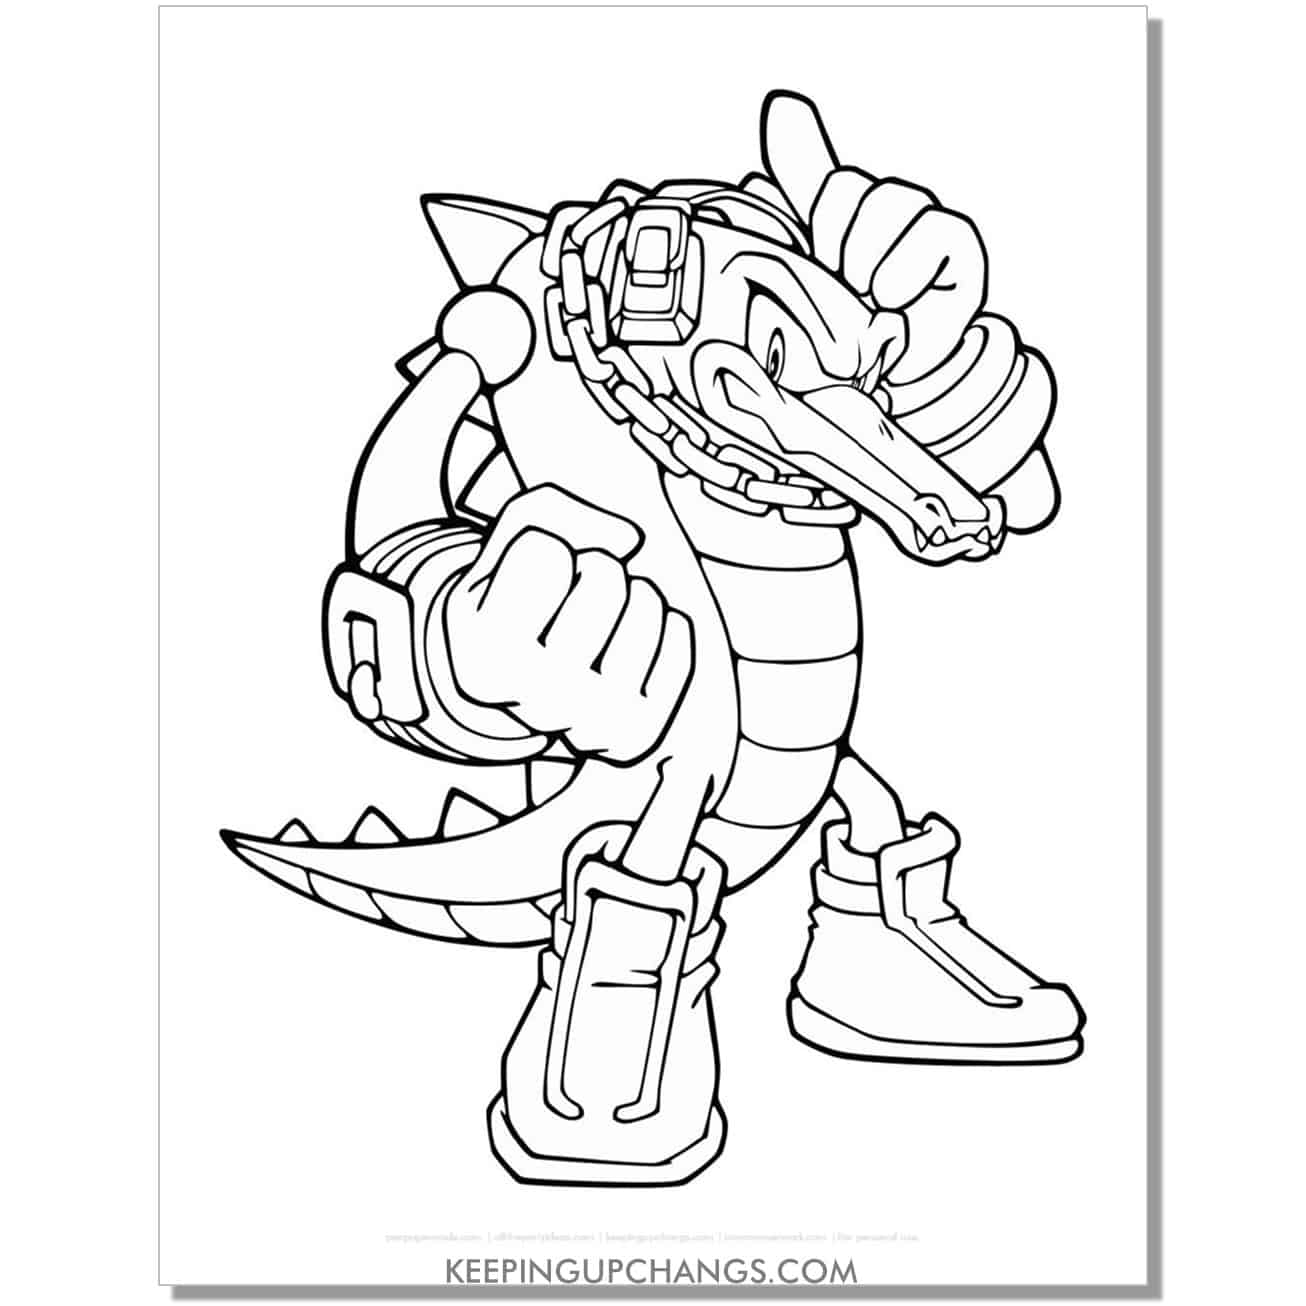 vector the crocodile sonic coloring page.